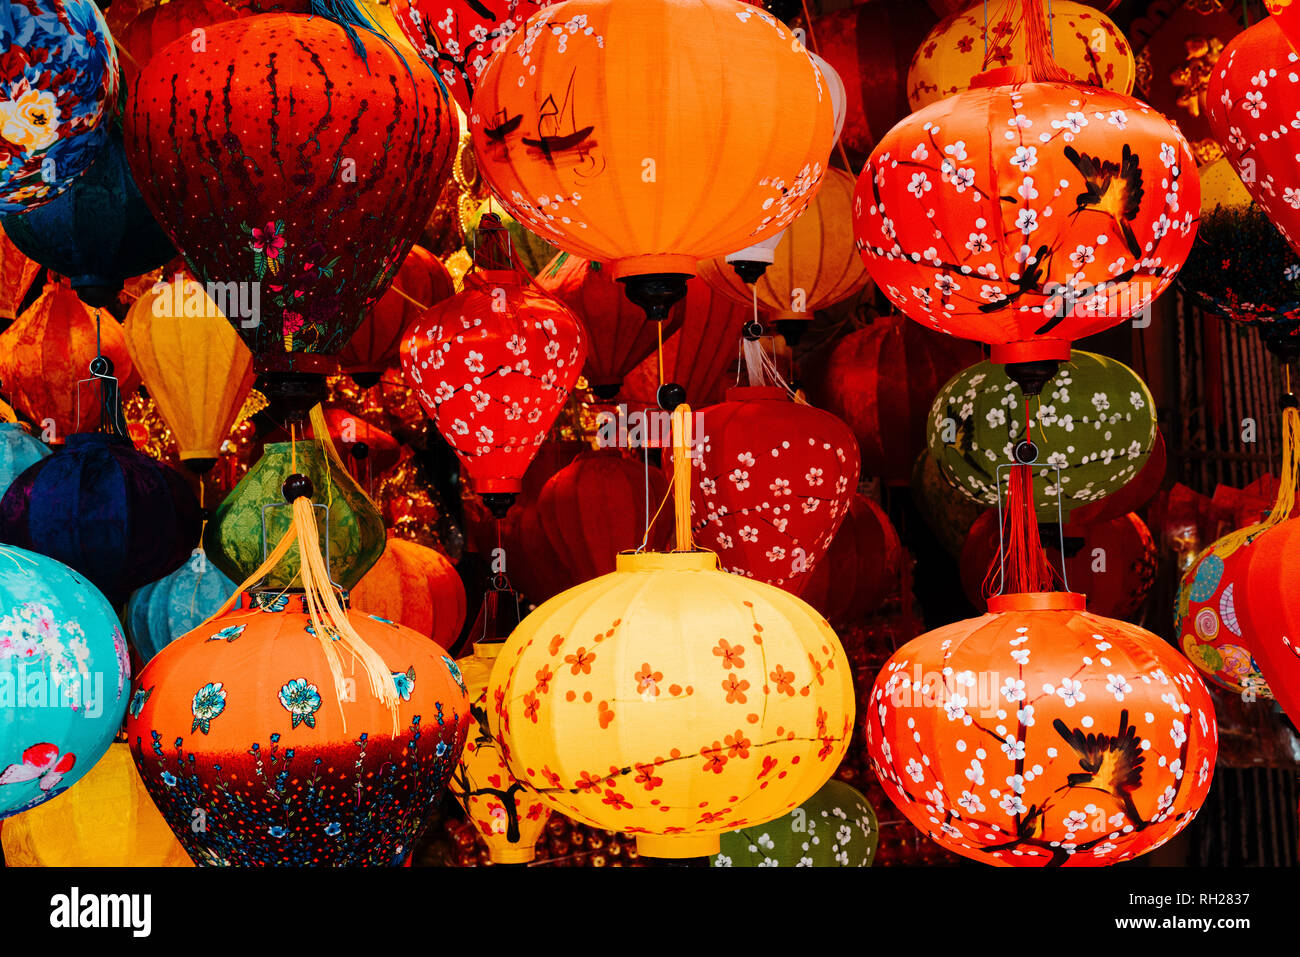 Lantern in Hanoi to buy from a vendor. Very colorful made lanterns. Stock Photo